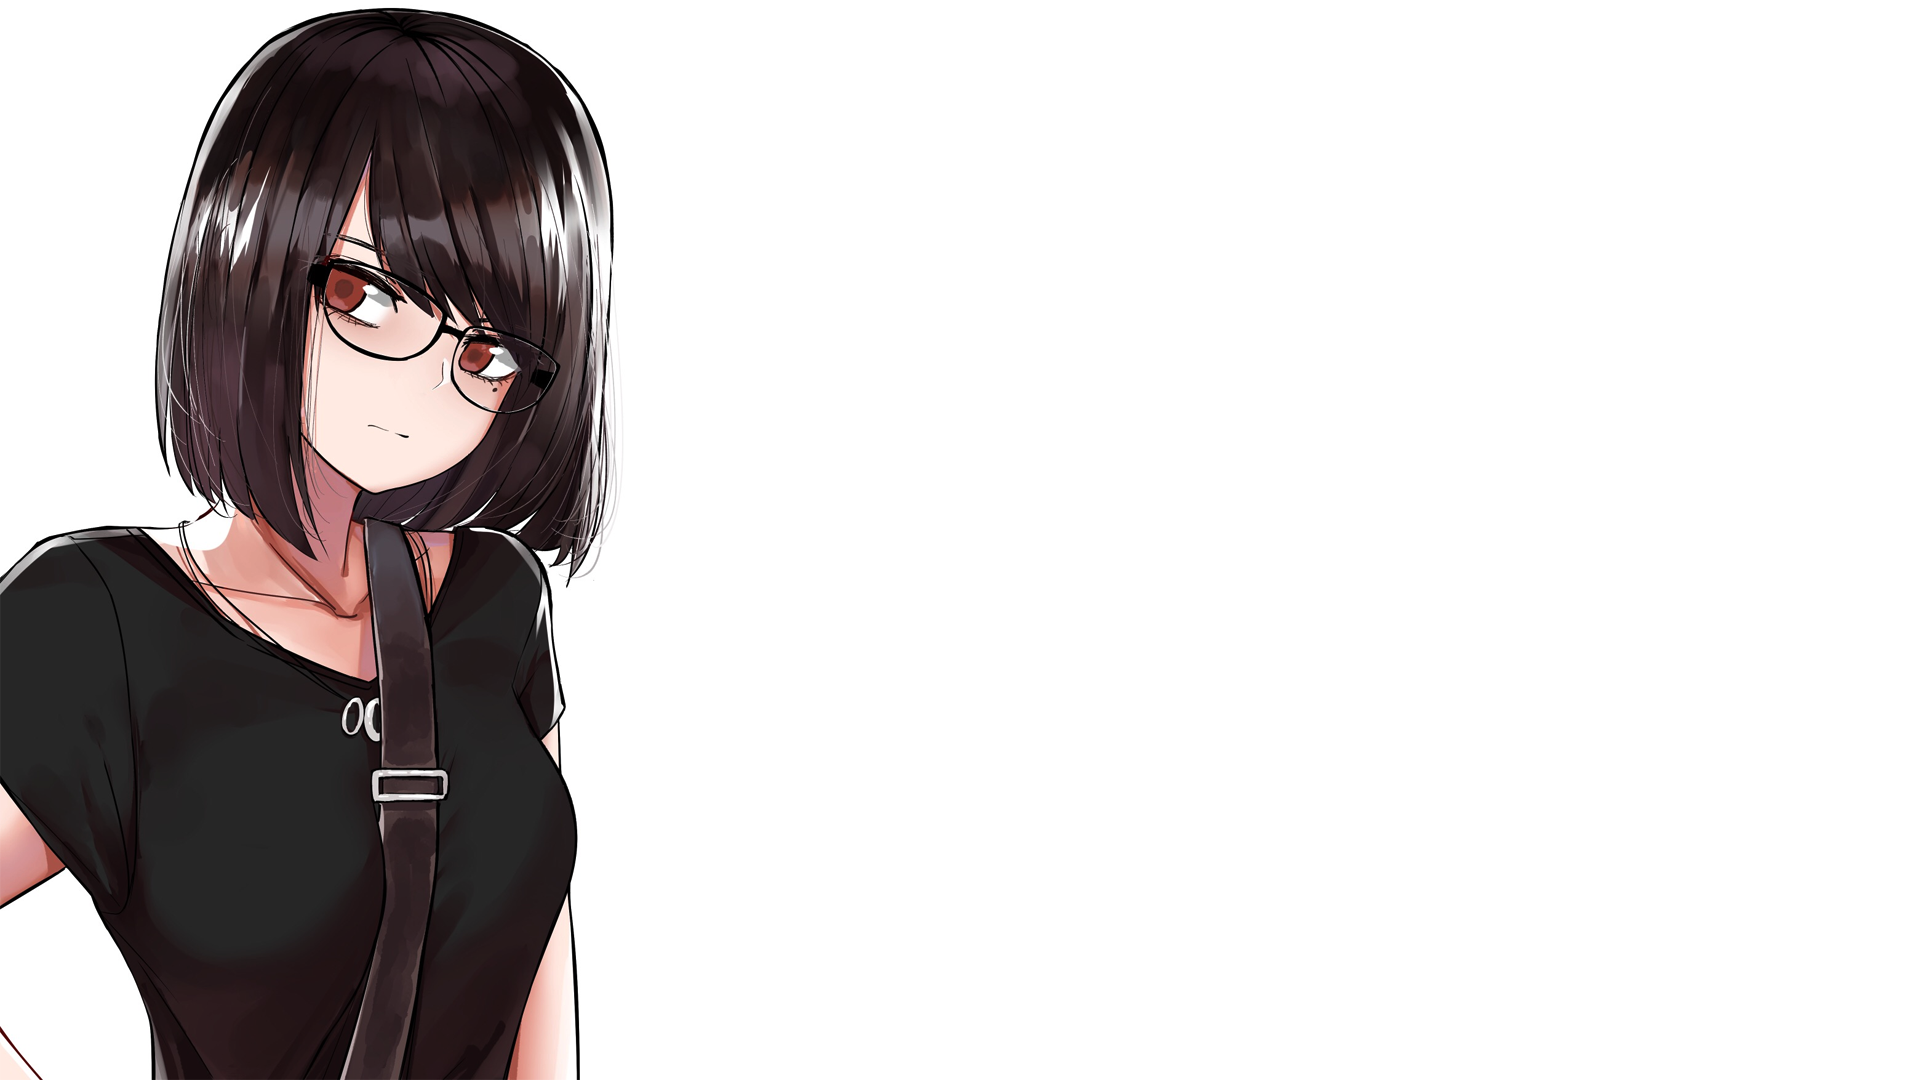 glasses Anime and girl with black hair